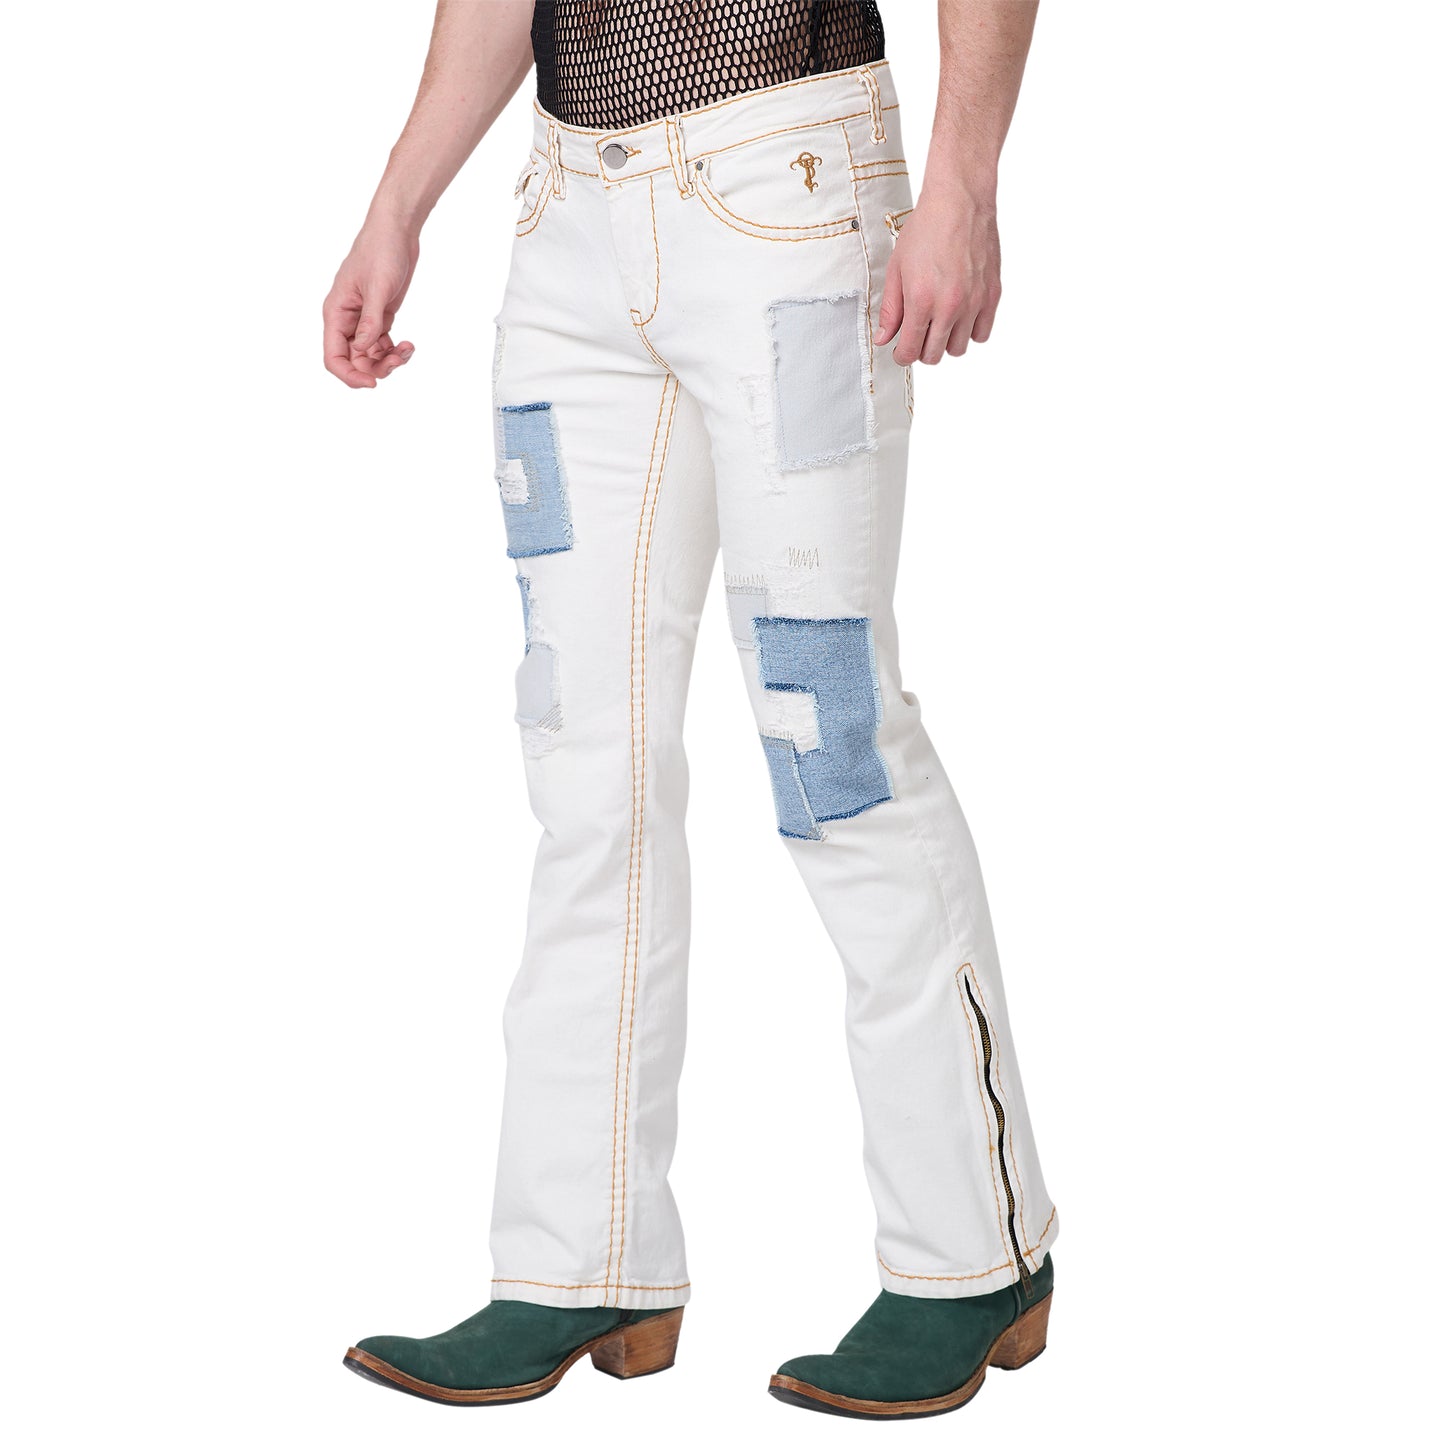 Mens White Boot-cut Slim Fit Jeans With Saddle Stitch Strechable, Bottom Zipper